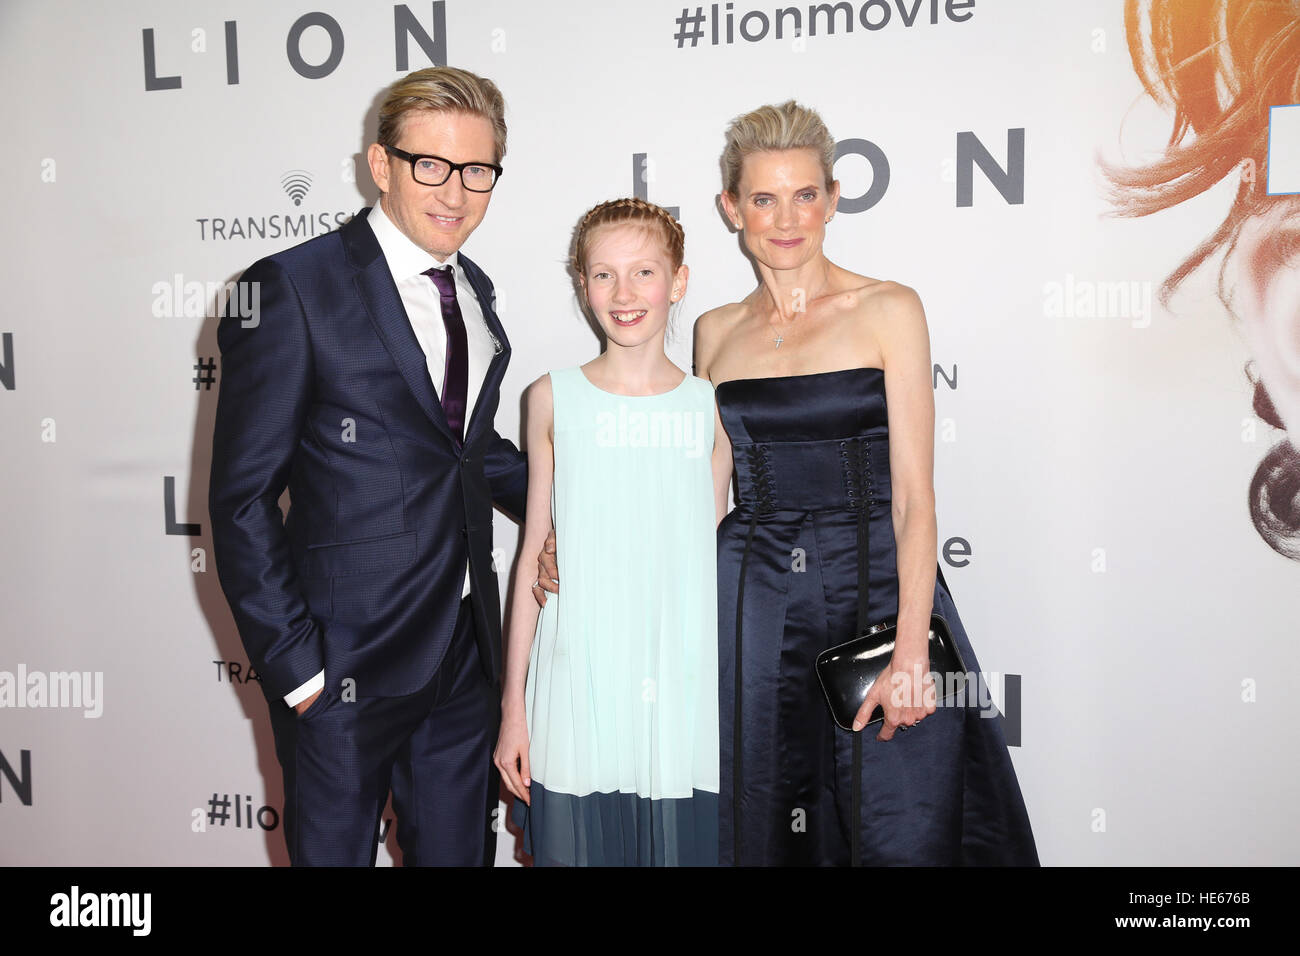 Sydney, Australia. 19 December 2016. Pictured: David Wenham, Kate Agnew,  Eliza Jane Wenham. The cast and crew of LION arrived on the red carpet for  the Australian premiere at the State Theatre